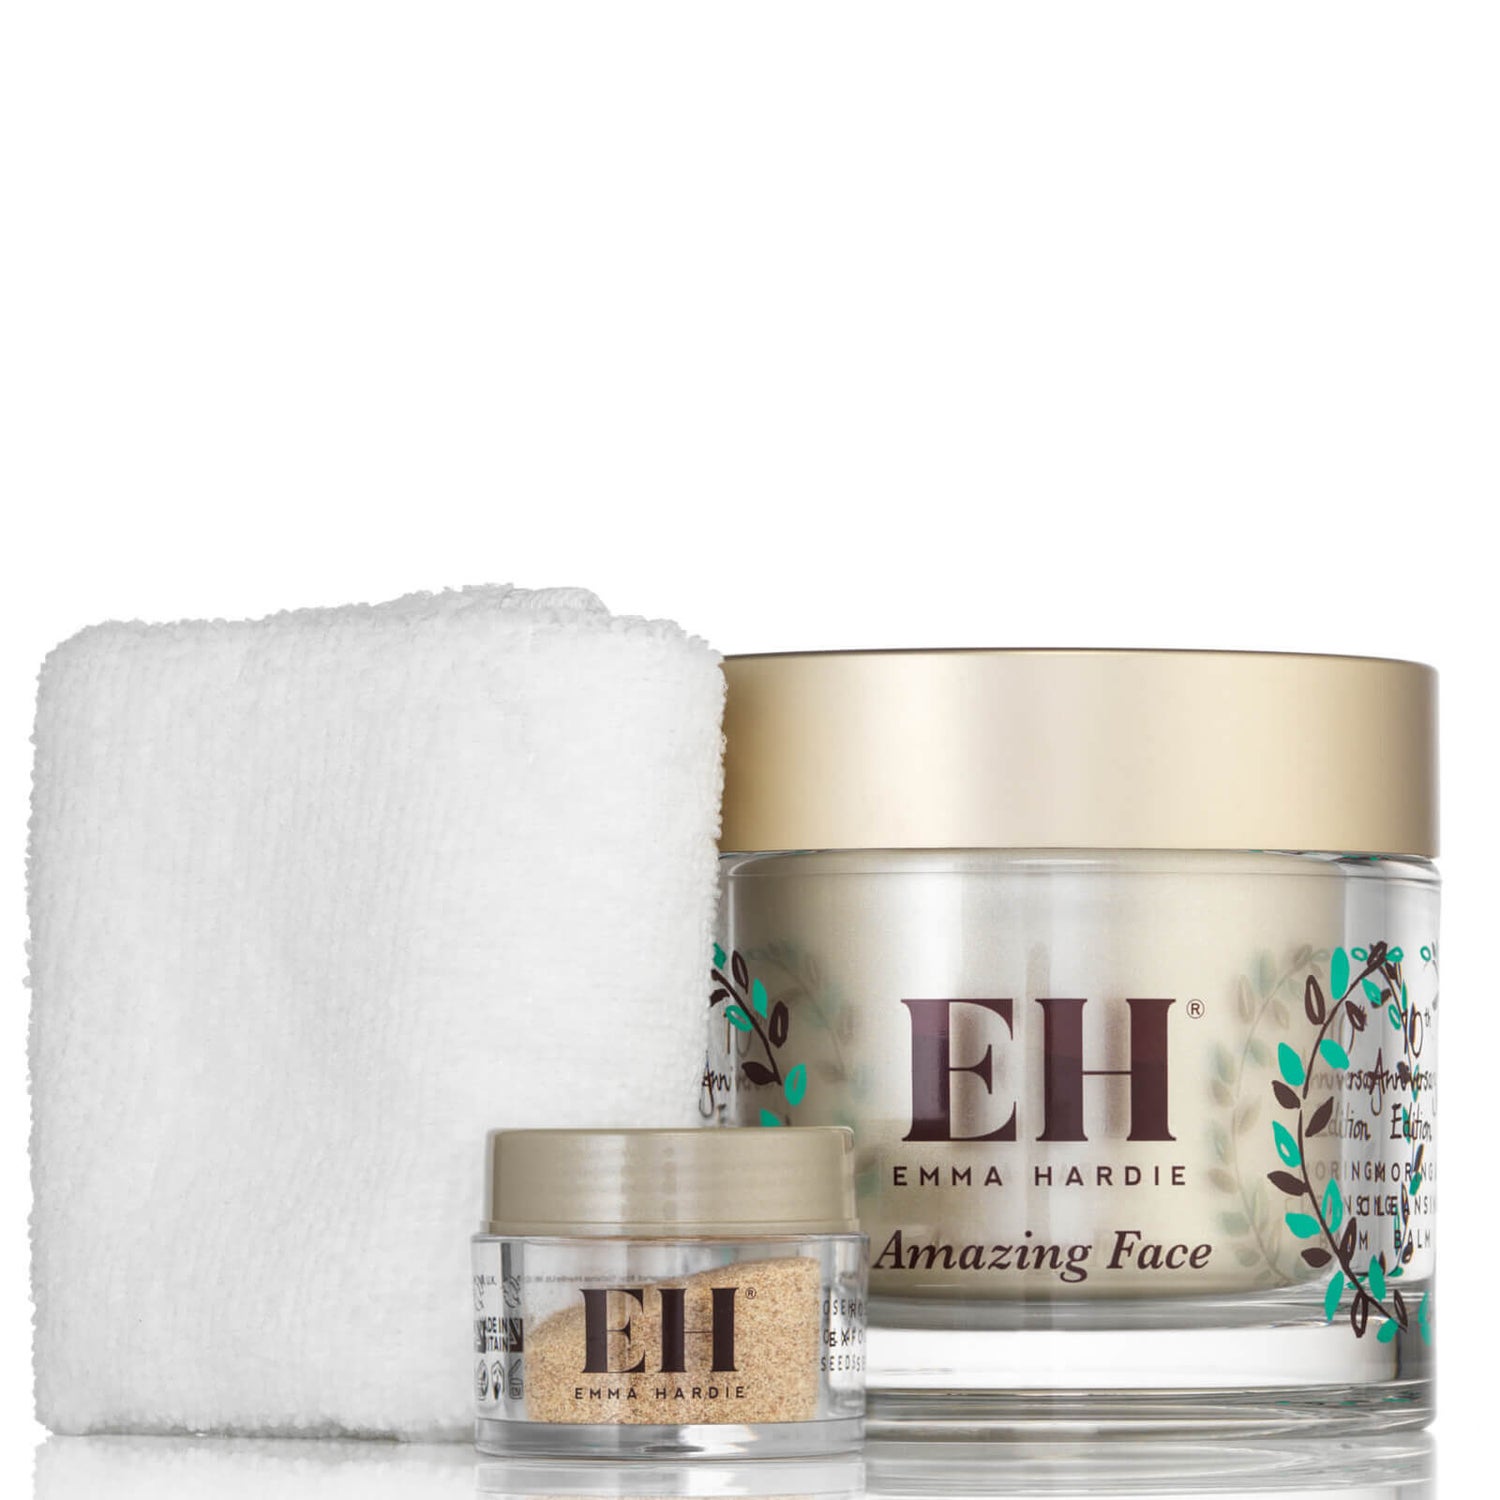 Emma Hardie Moringa Cleansing Balm with Cloth & Rosehip Exfoliating Seeds 10th Anniversary Edition (Worth $140)